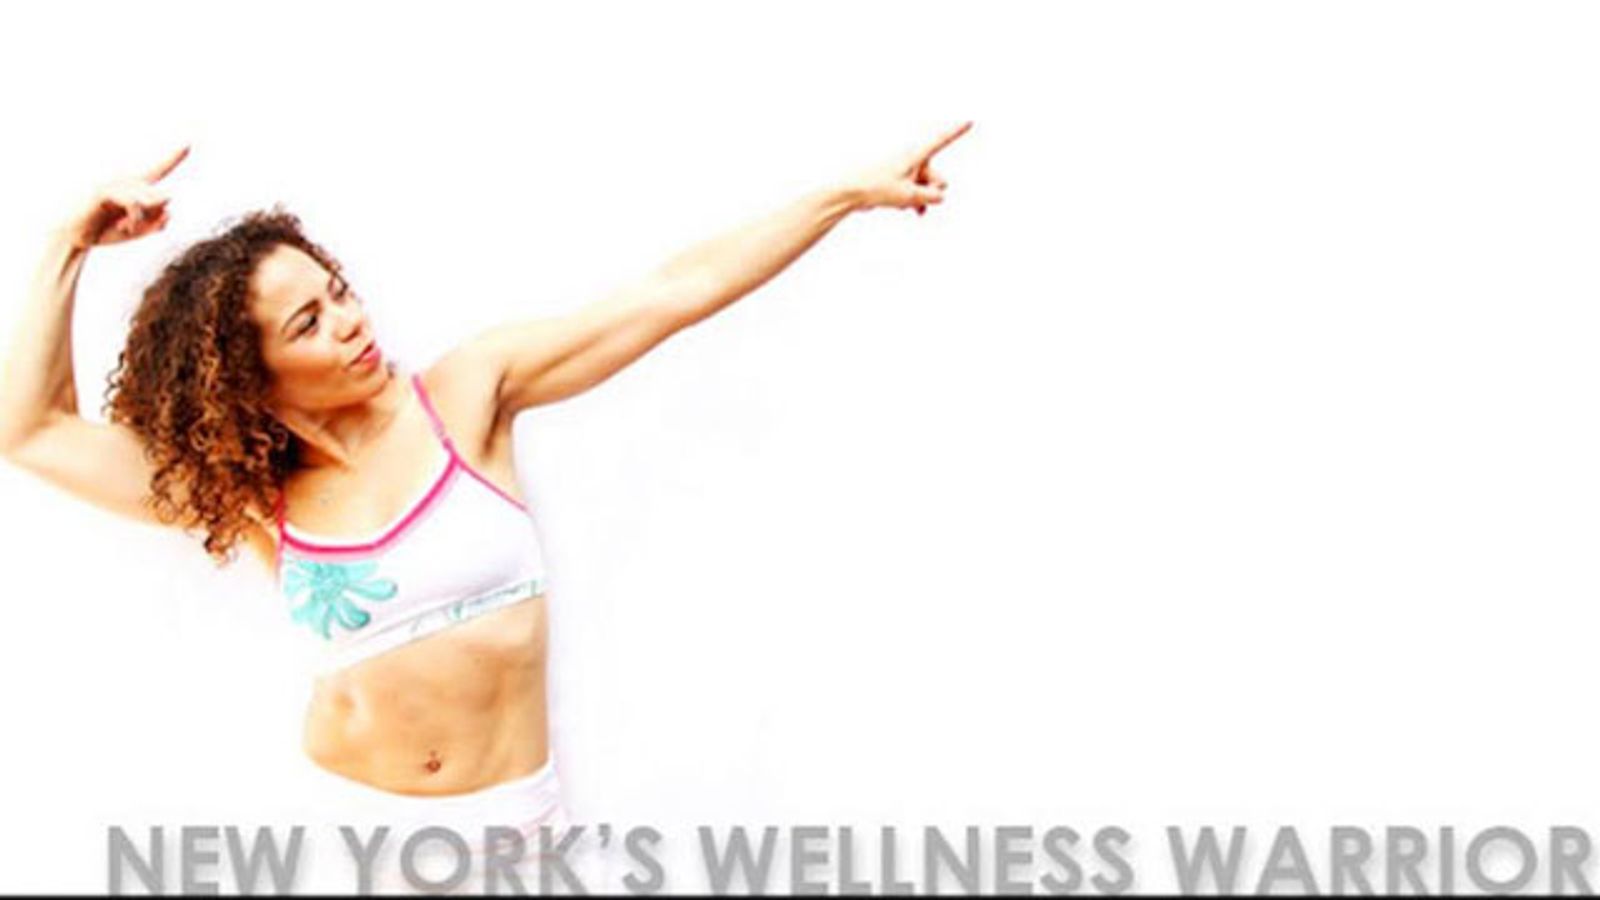 HiPleasures Working With NY’s Wellness Warrior To Promo Product